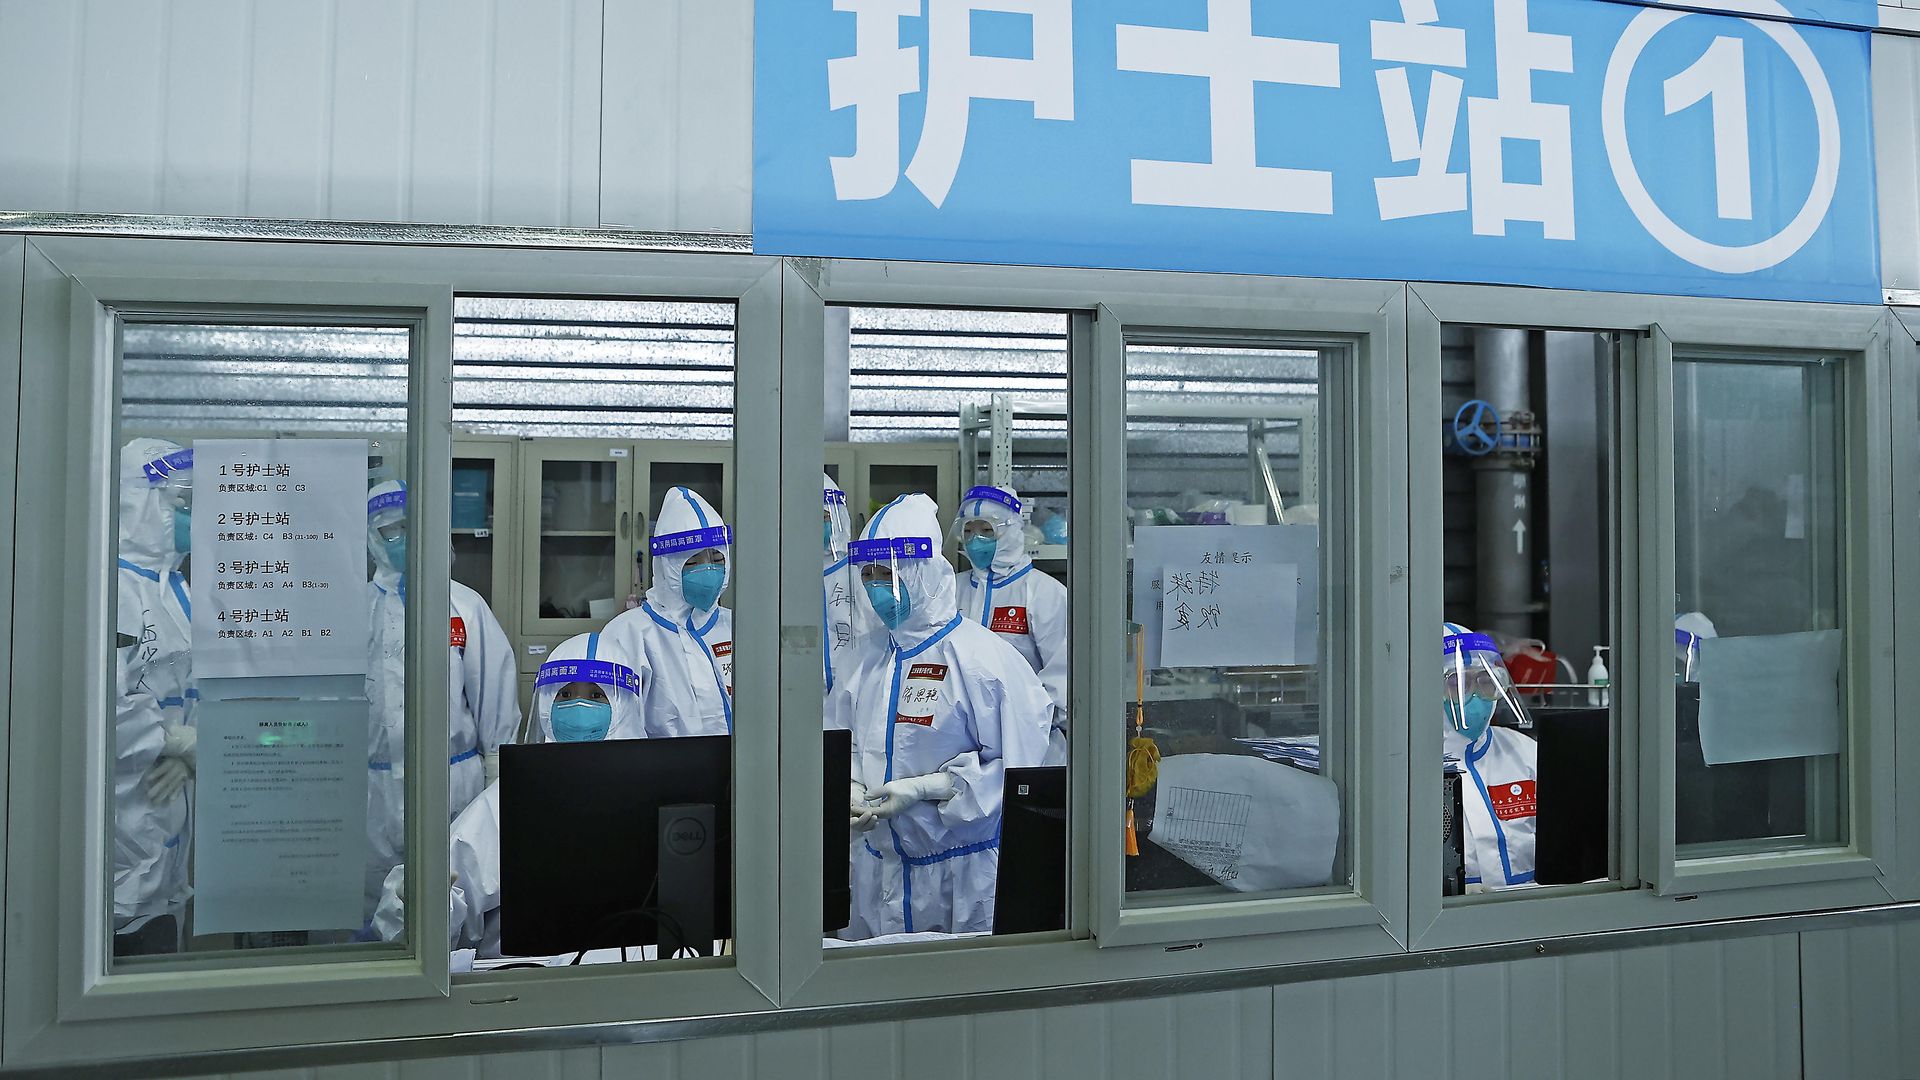 Medical staff monitor health data of patients in the quarantine zone at the Shanghai New International Expo Center in Shanghai, China on April 10, 2022.